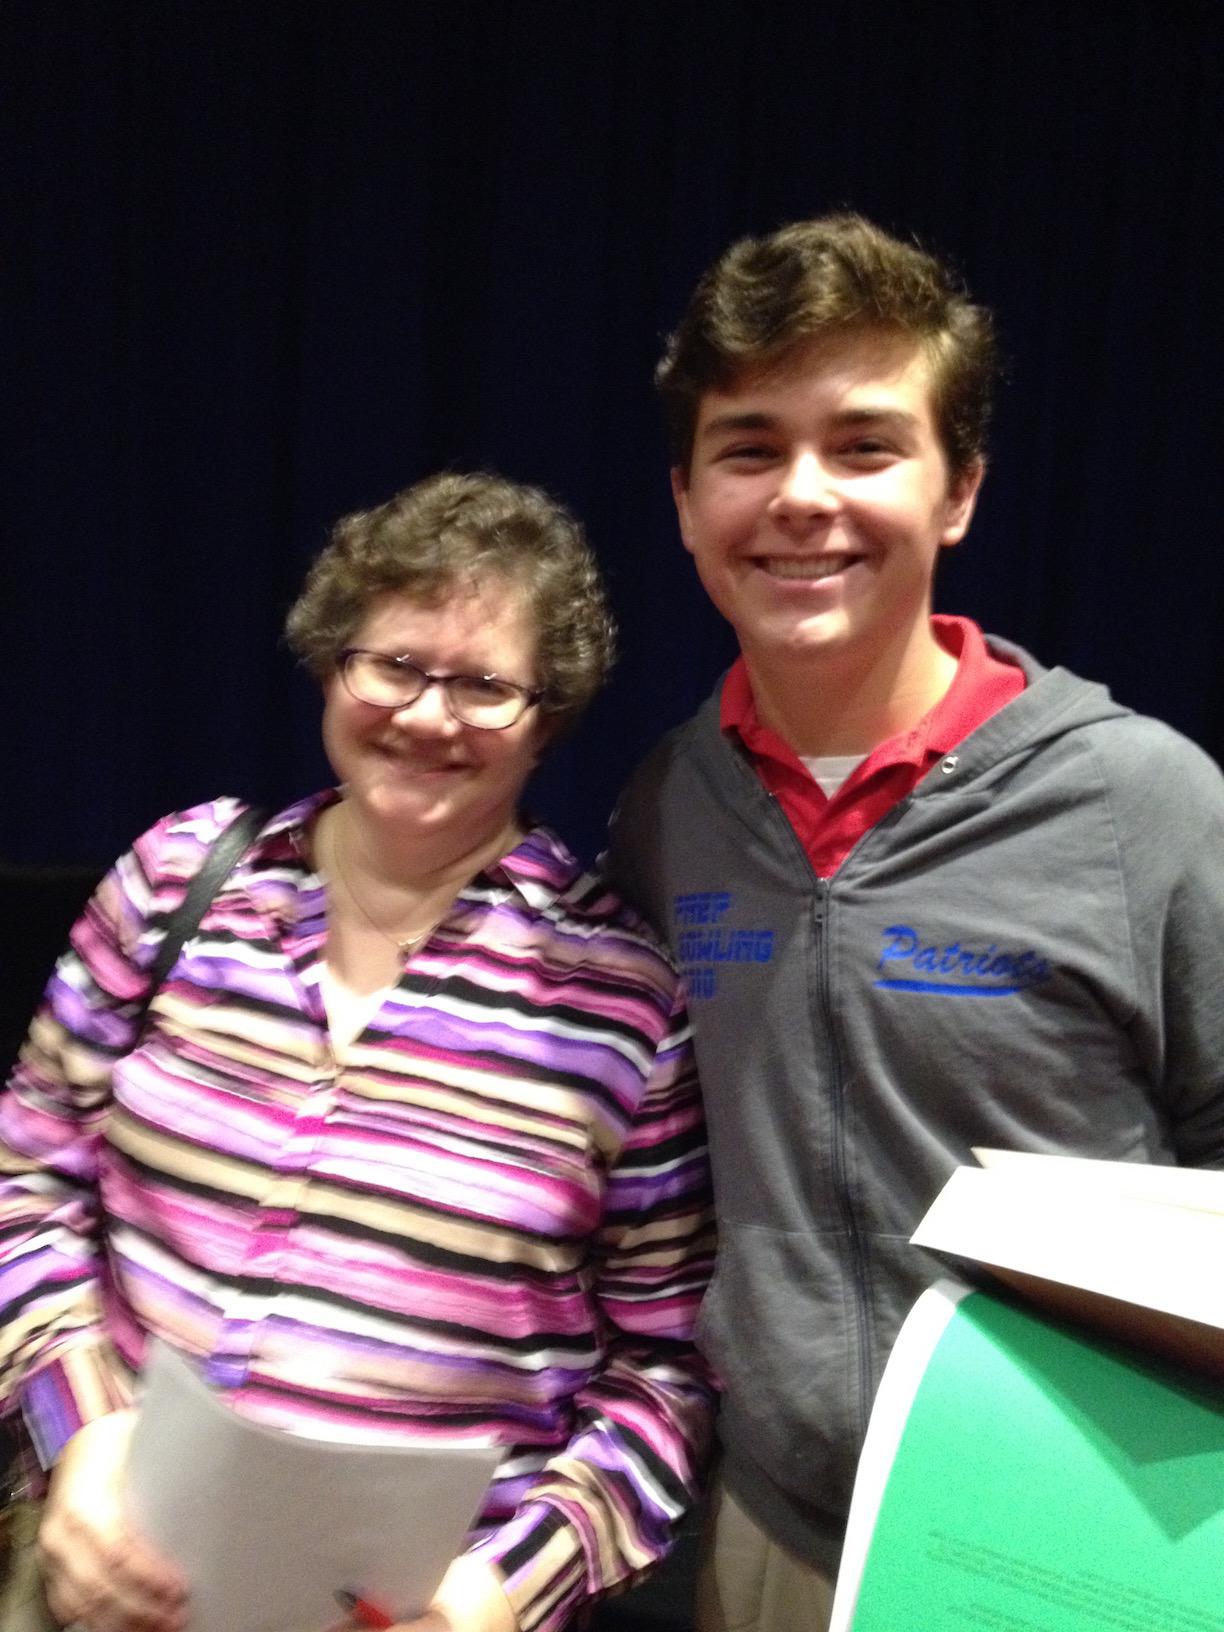 Dr. Whitney and first place winner Lawson Marchetti. Photo courtesy of Dr. Lisa Whitney.